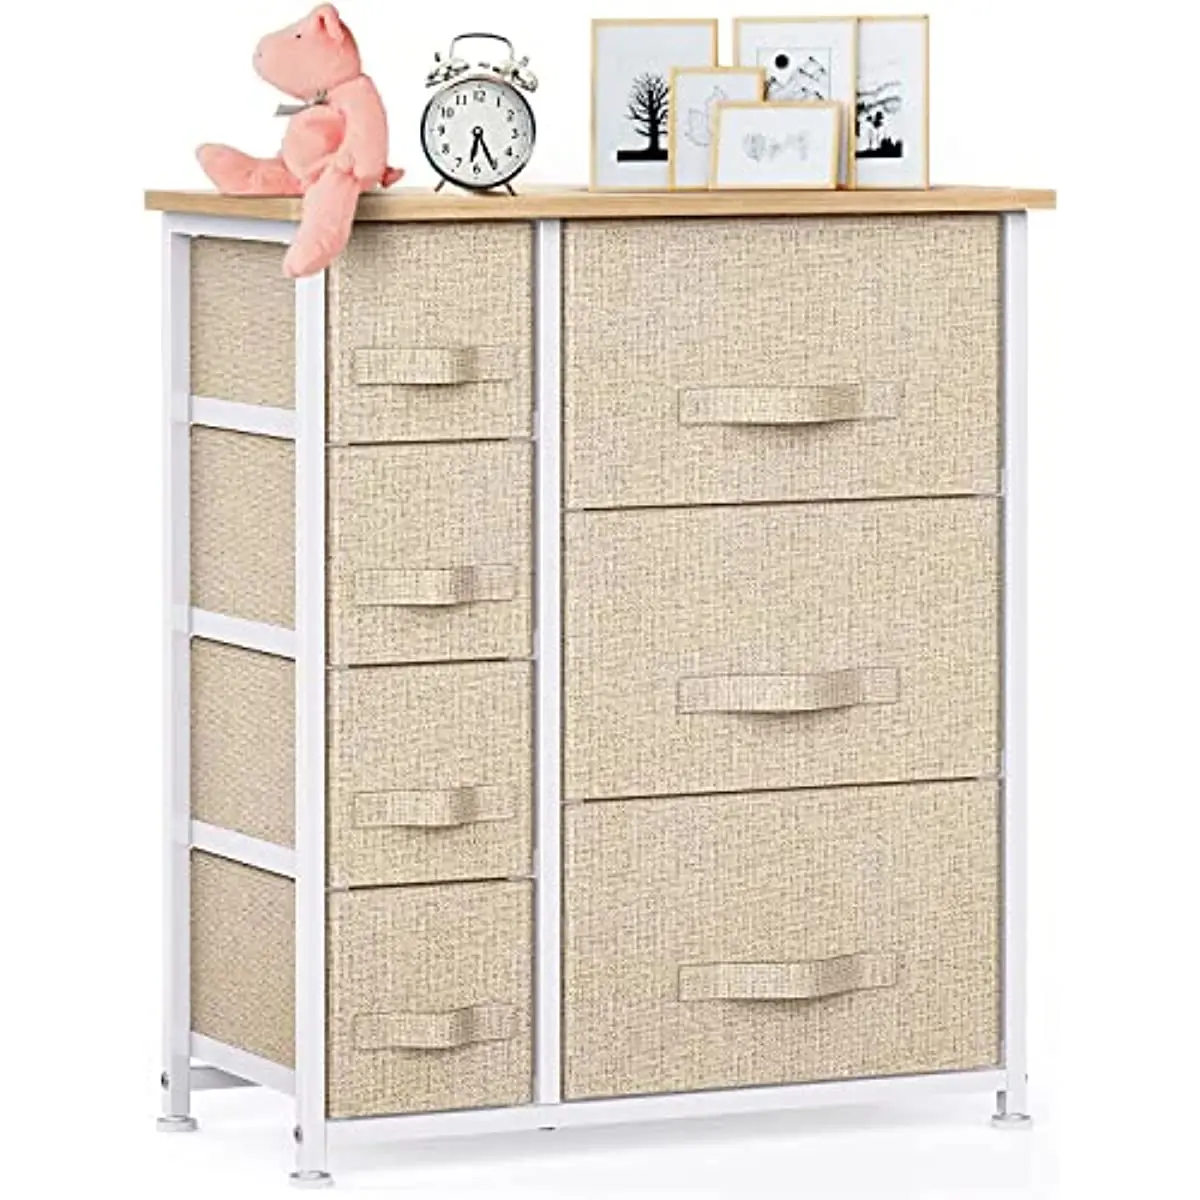 7 Drawer Fabric Dresser Storage Tower, Dresser Chest with Wood Top and Easy Pull Handle, Organizer Unit for Closets